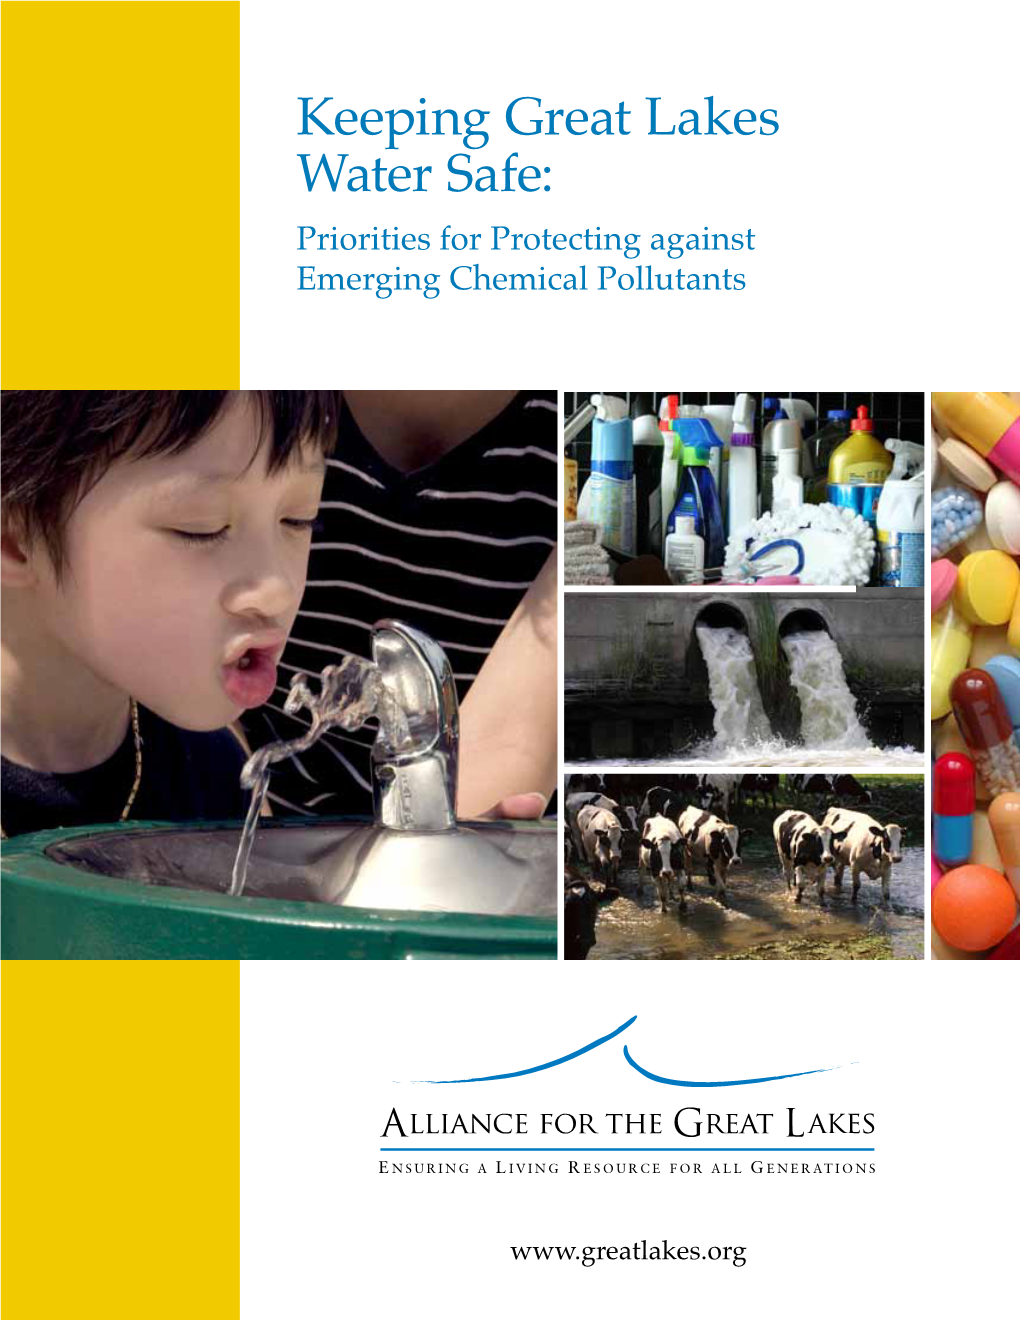 Keeping Great Lakes Water Safe: Priorities for Protecting Against Emerging Chemical Pollutants